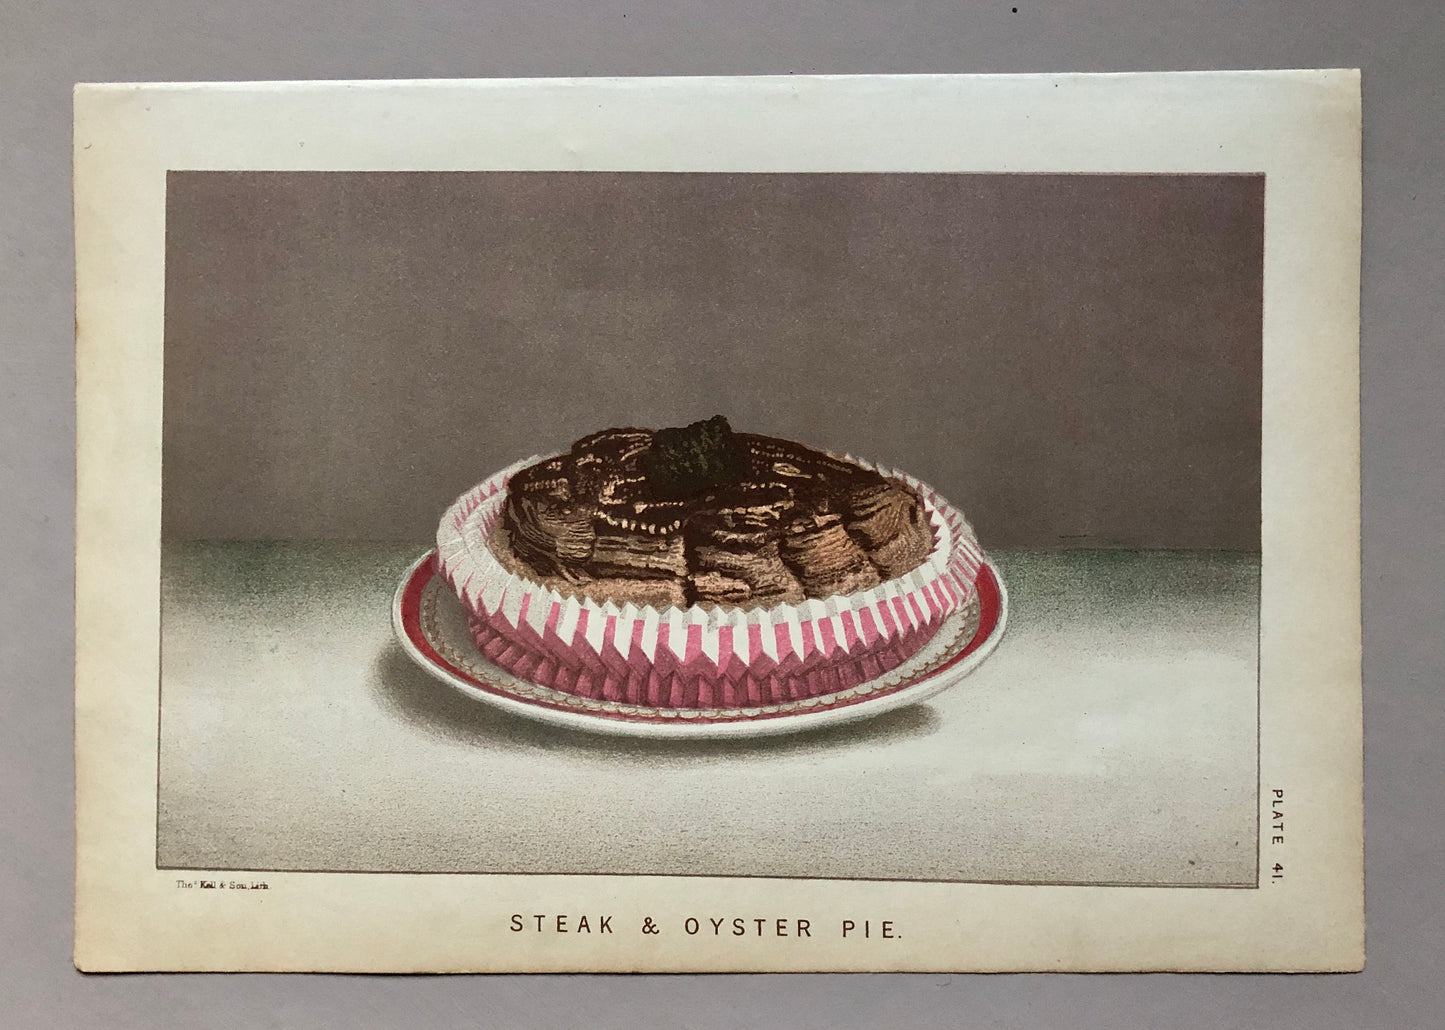 Three Plates of food From a Victorian Cookbook. Original chromolithographs. Engaved by Thomas Kell in the 1880’s. Size: 17.5 x 25 cms.